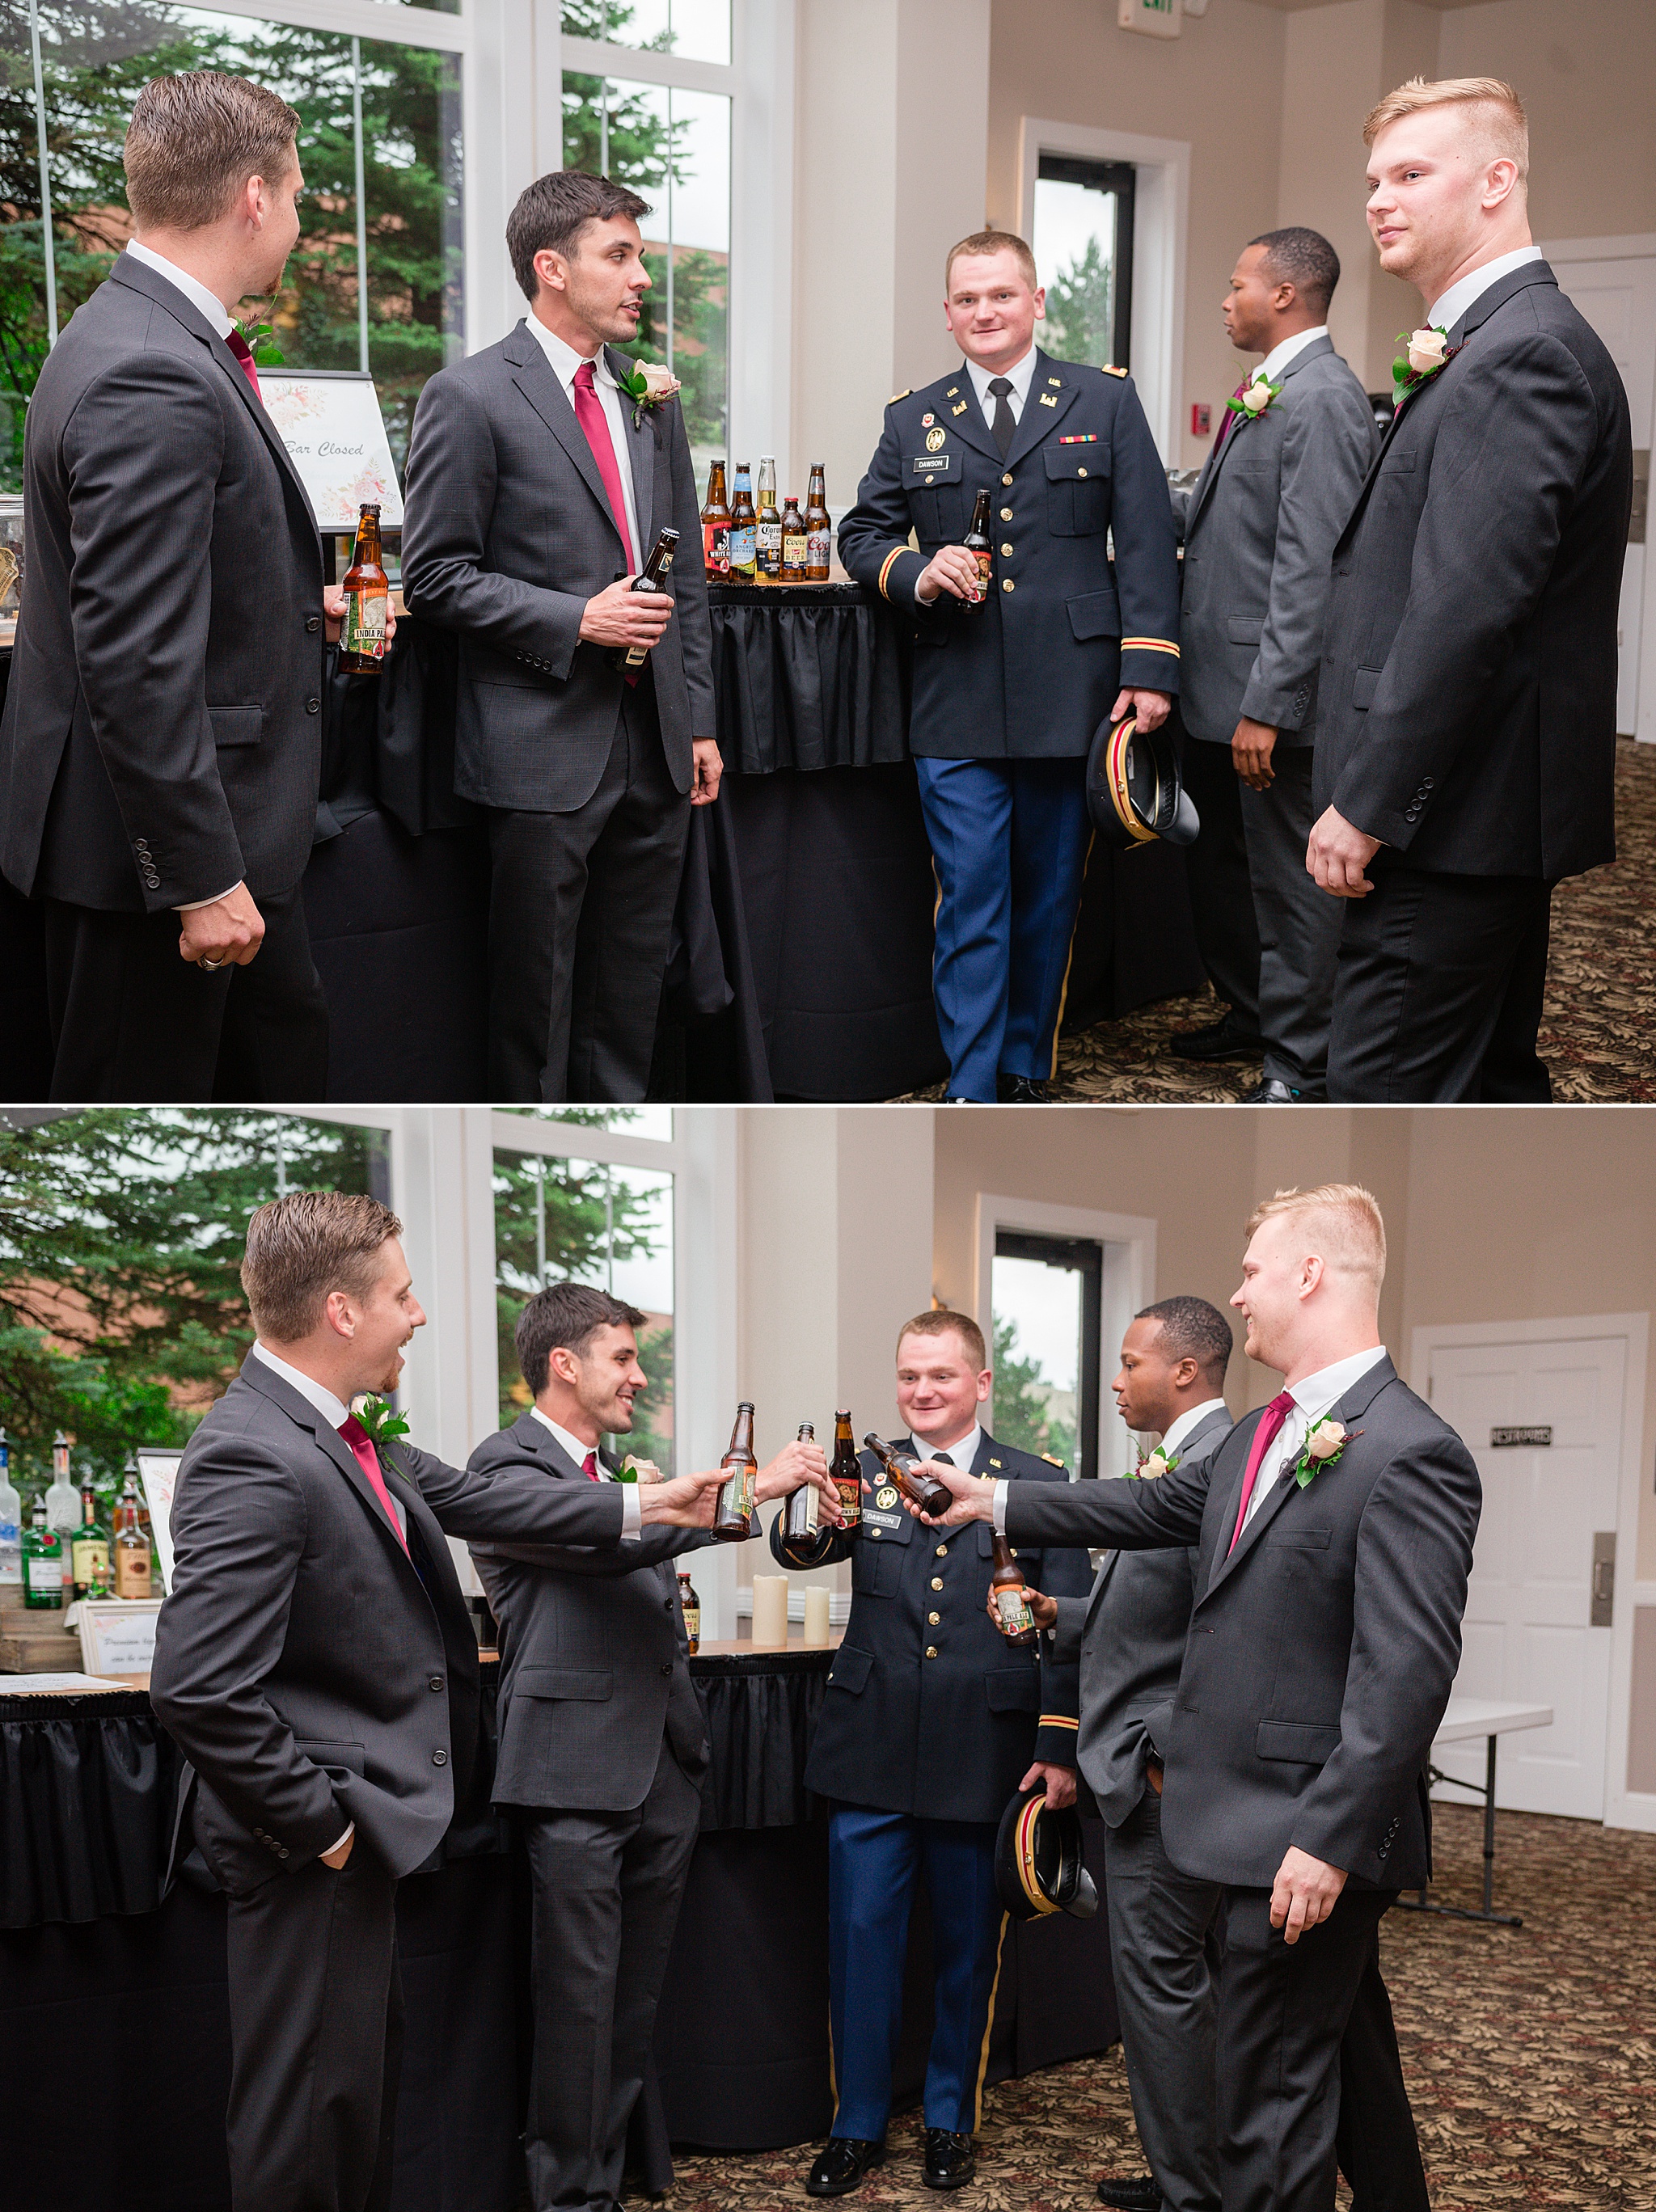 Groom & Groomsmen hanging out near the bar before the wedding ceremony. Tania & Chris' Denver Wedding at the Wedgewood Ken Caryl by Colorado Wedding Photography, Jennifer Garza. Colorado Wedding Photographer, Colorado Wedding Photography, Denver Wedding Photographer, Denver Wedding Photography, US Marine Corp Wedding, US Marine Corp, Military Wedding, US Marines, Wedgewood Weddings, Wedgewood Weddings Ken Caryl, Colorado Wedding, Denver Wedding, Wedding Photographer, Colorado Bride